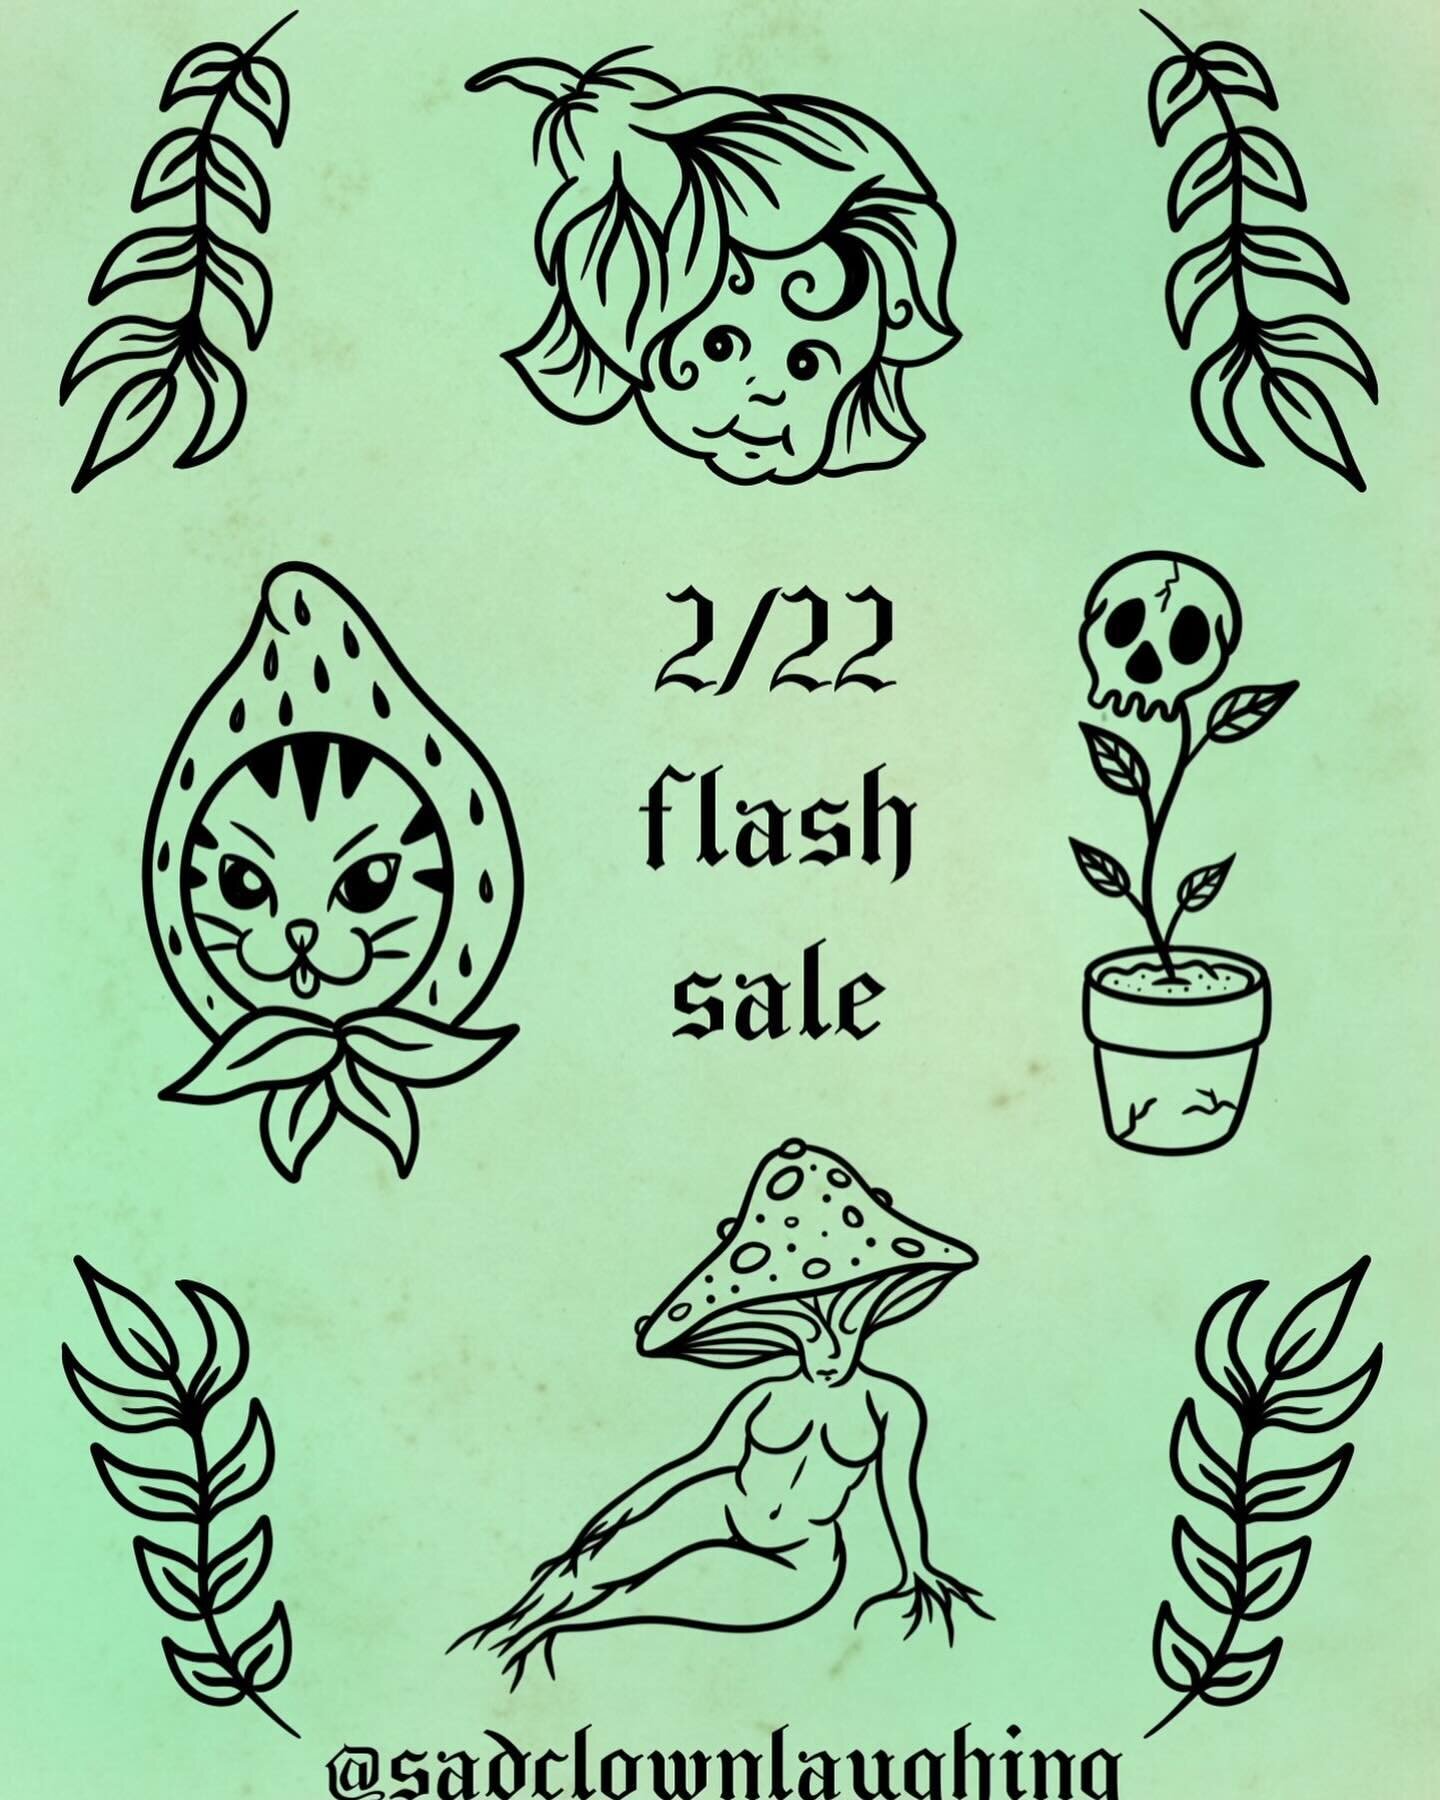 ‼️🚨STUDIO 222 FLASH SALE🚨‼️ 

***ALL WEEKEND LONG***

Our artists here at Studio 222 have drawn up special flash to celebrate @shelly_turner_  birthday today 2/22🎂🎈✨ (check out their individual pages for all designs) 

POP on in and she her some 